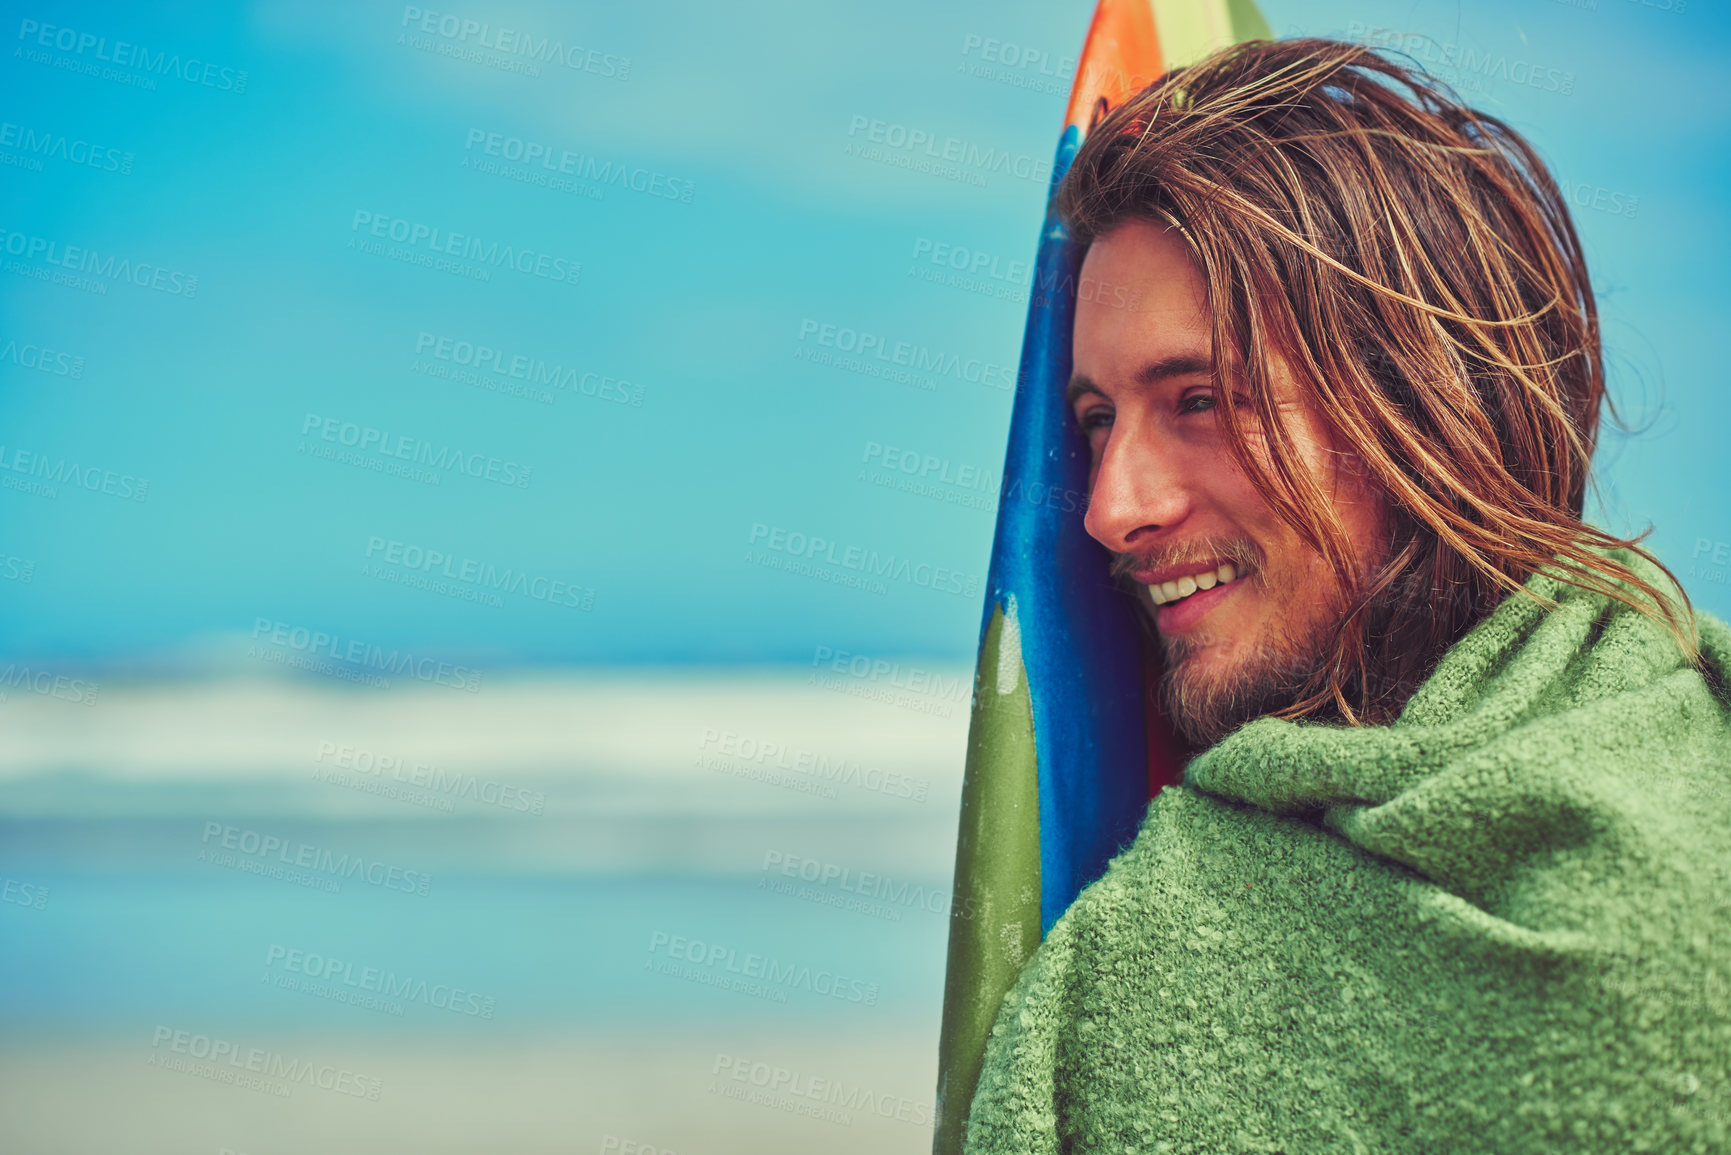 Buy stock photo Cropped shot of a young surfer leaning against his surfboard